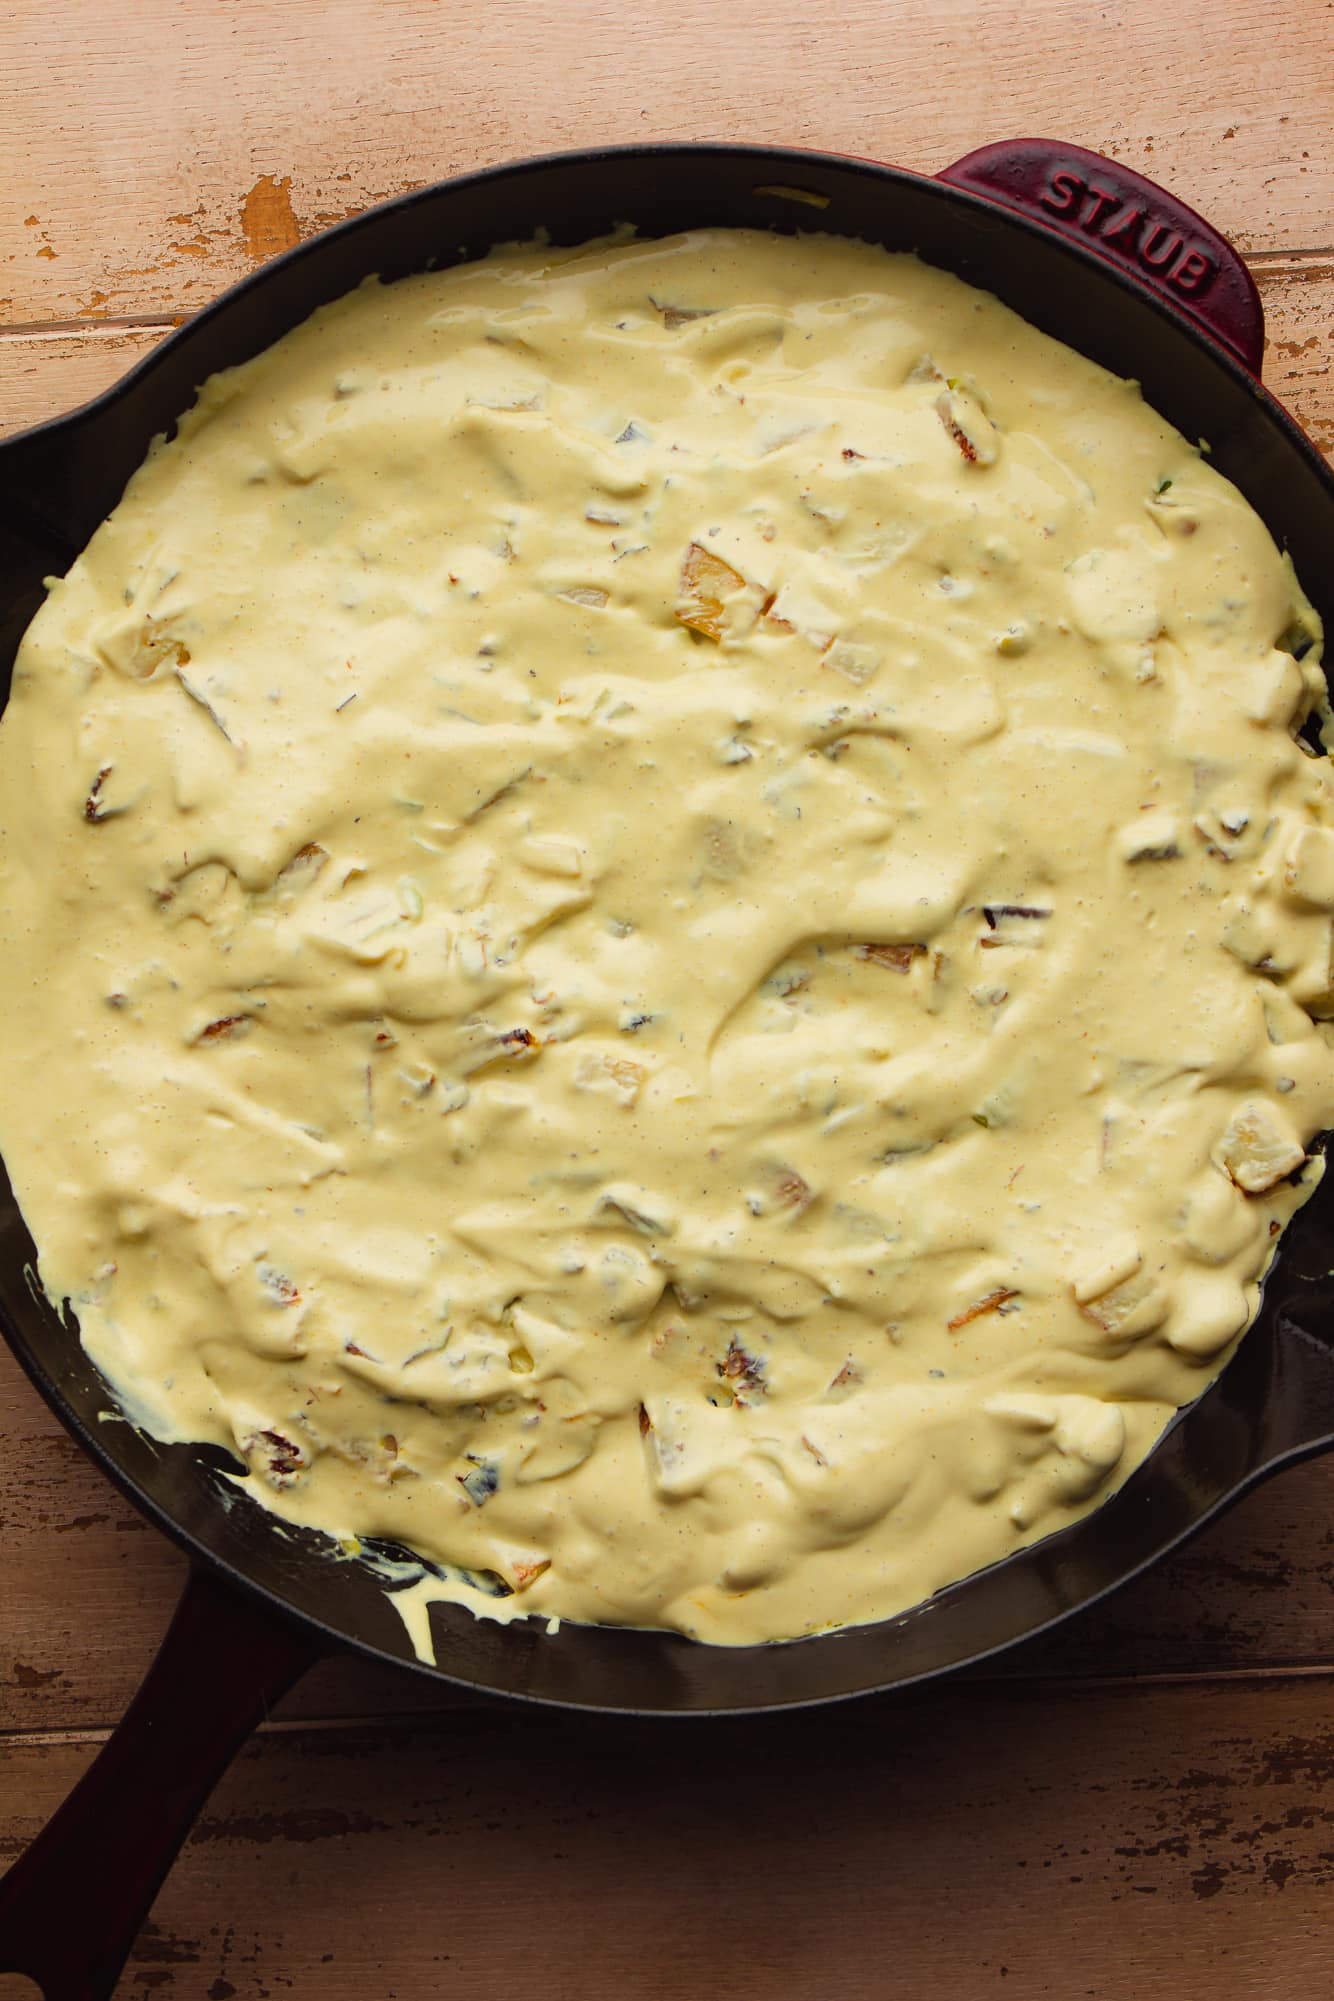 cooked vegetables topped with a creamy yellow sauce in a large black skillet.